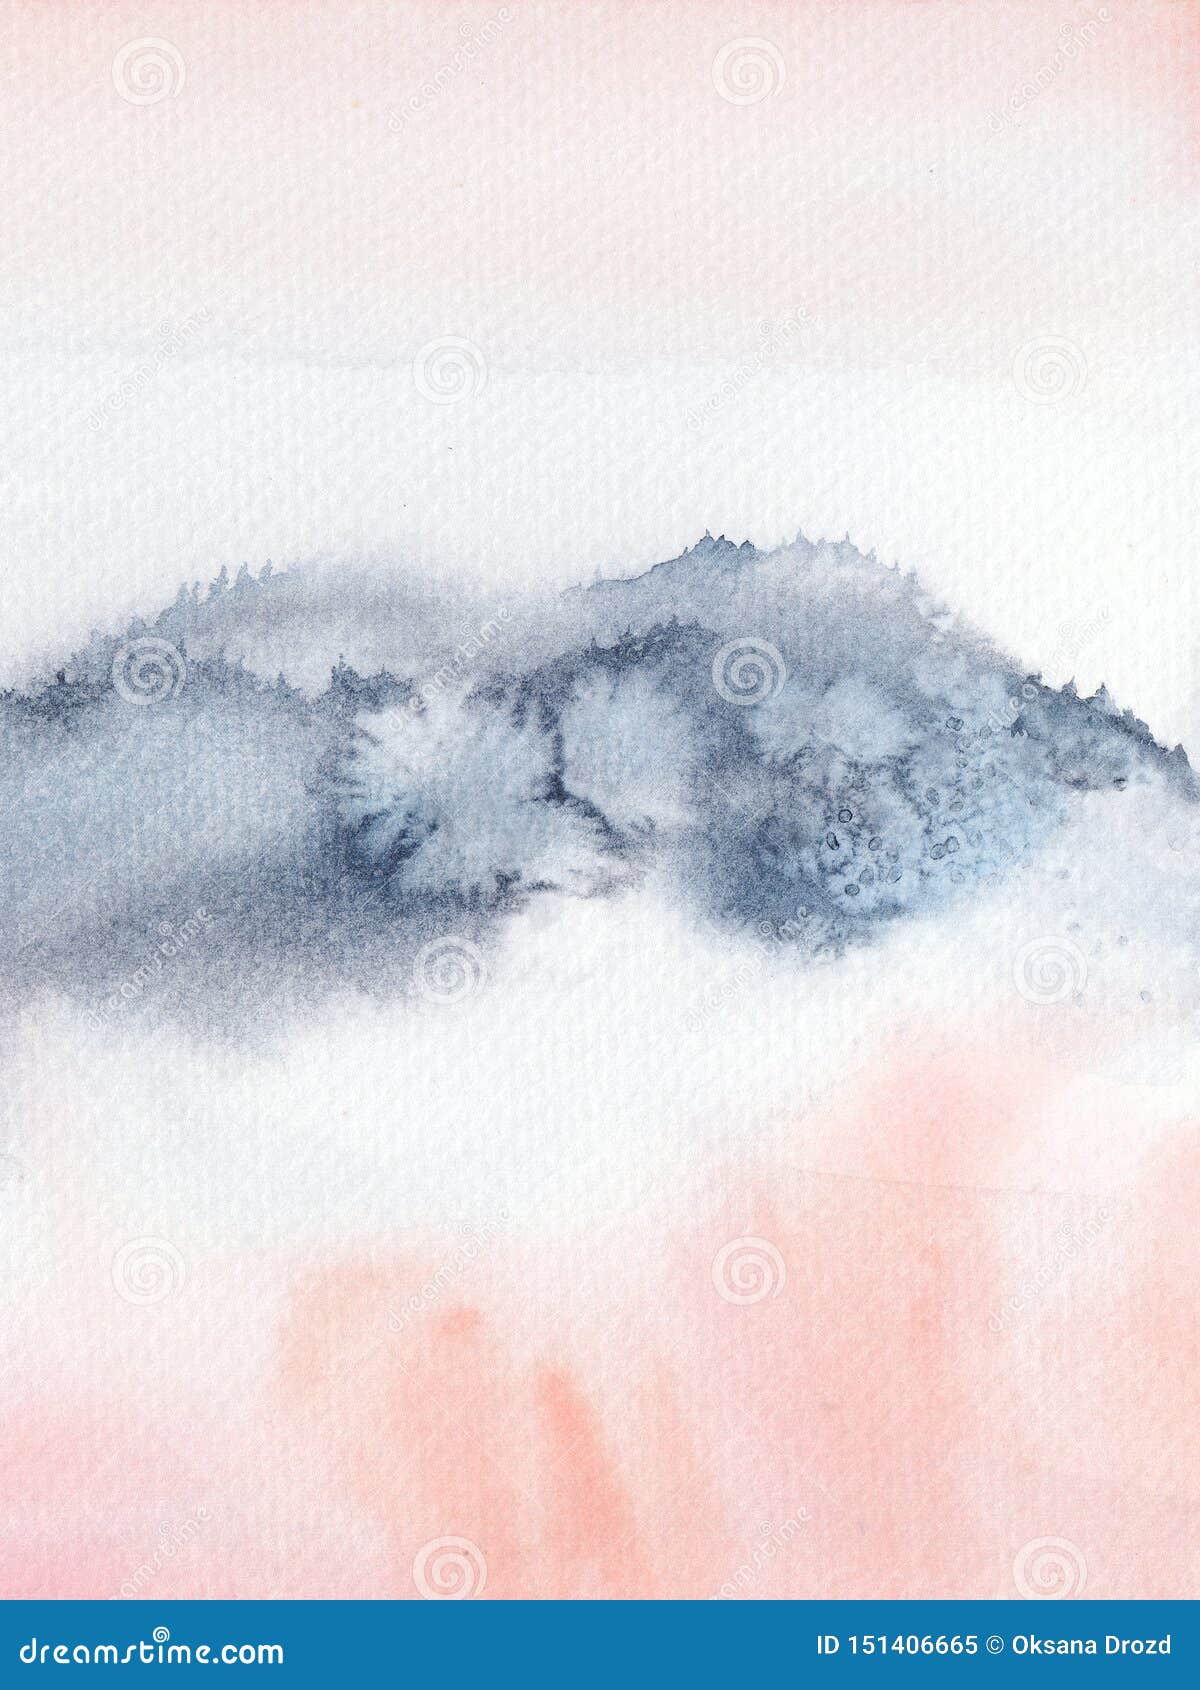 Blush Pink And Navyblue Abstract Watercolor Hand Painted Landscape Stock Image - Image Of Gray, Pastel: 151406665